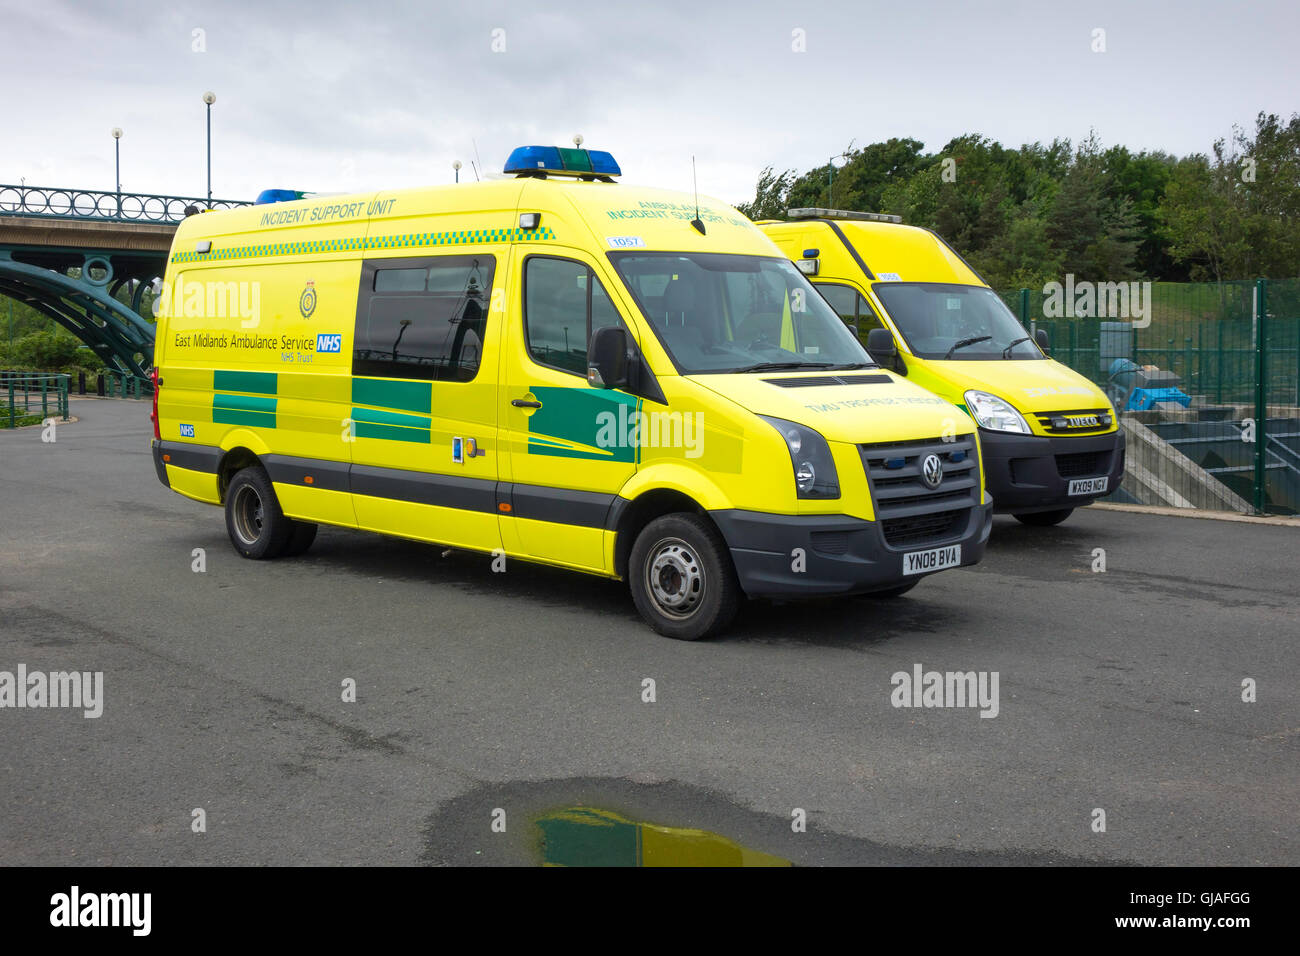 Ambulance Incident Support Unit Vehicles from East Midlands NHS at Tees the Barrage White Water course for crew training Stock Photo